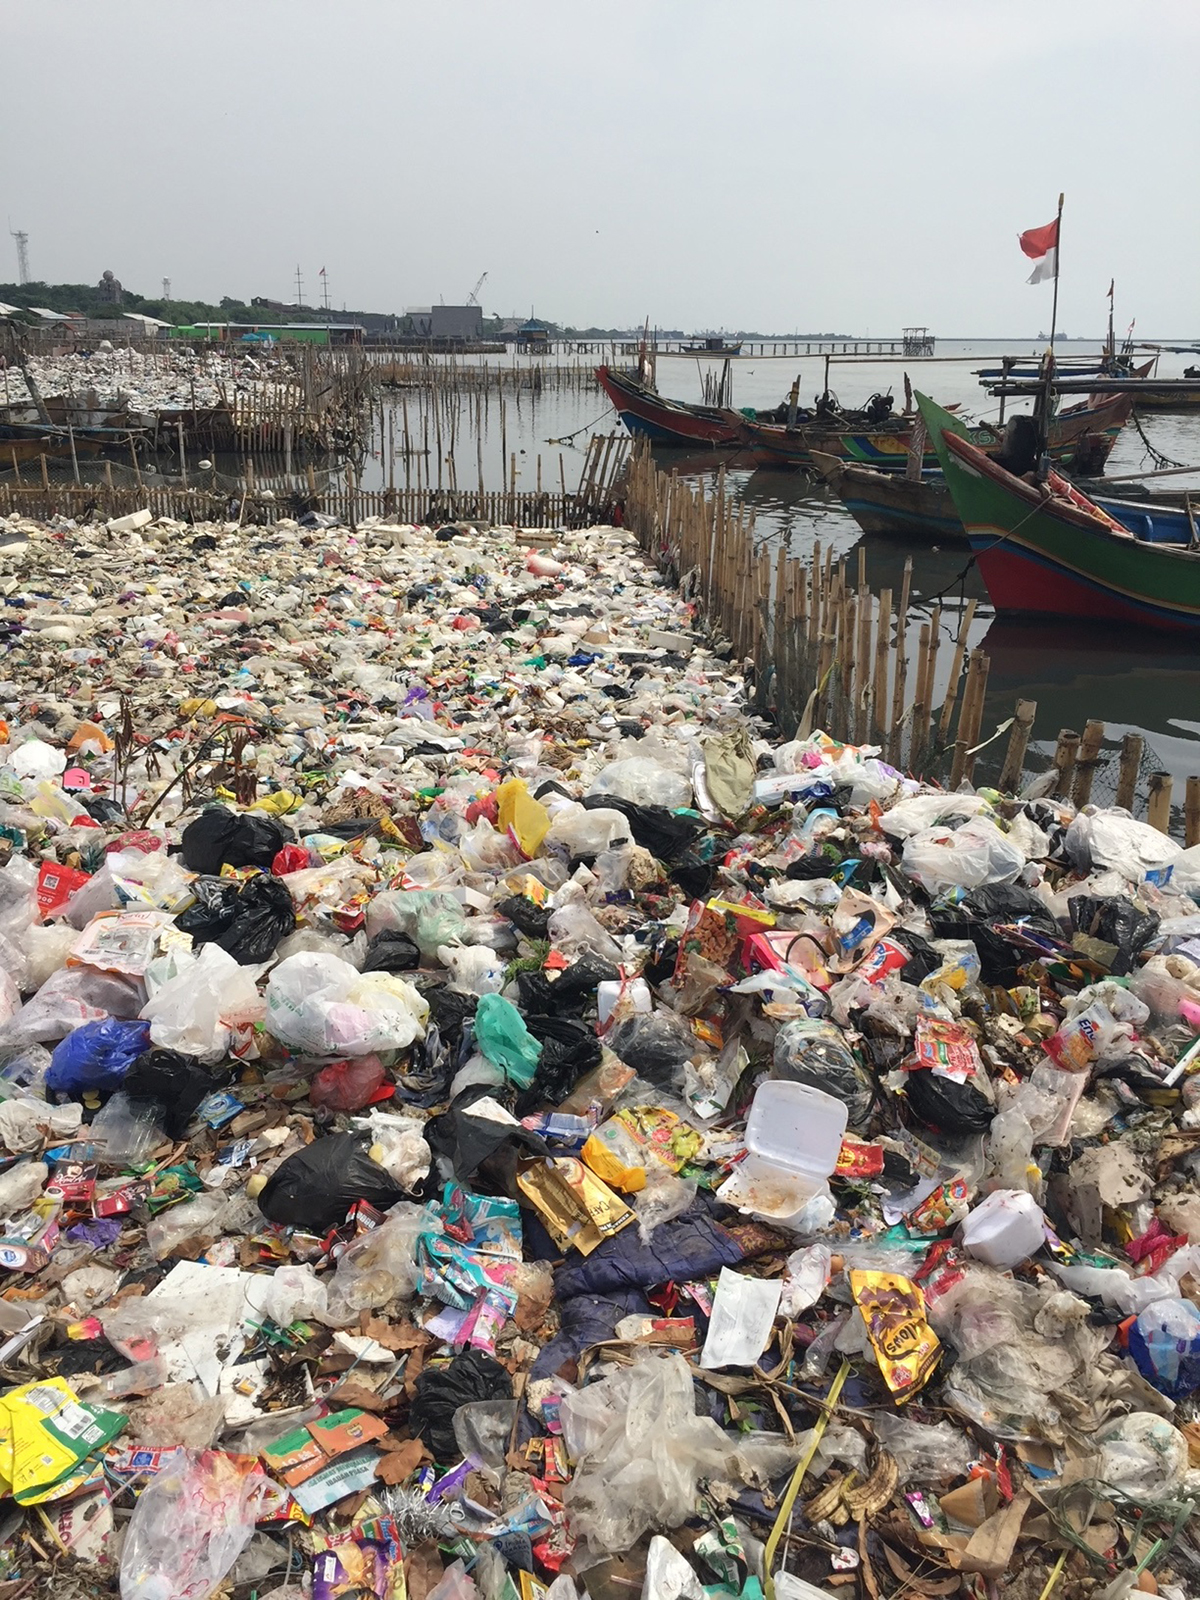 Figure 6.8 Trash next to a waterway in Indonesia.